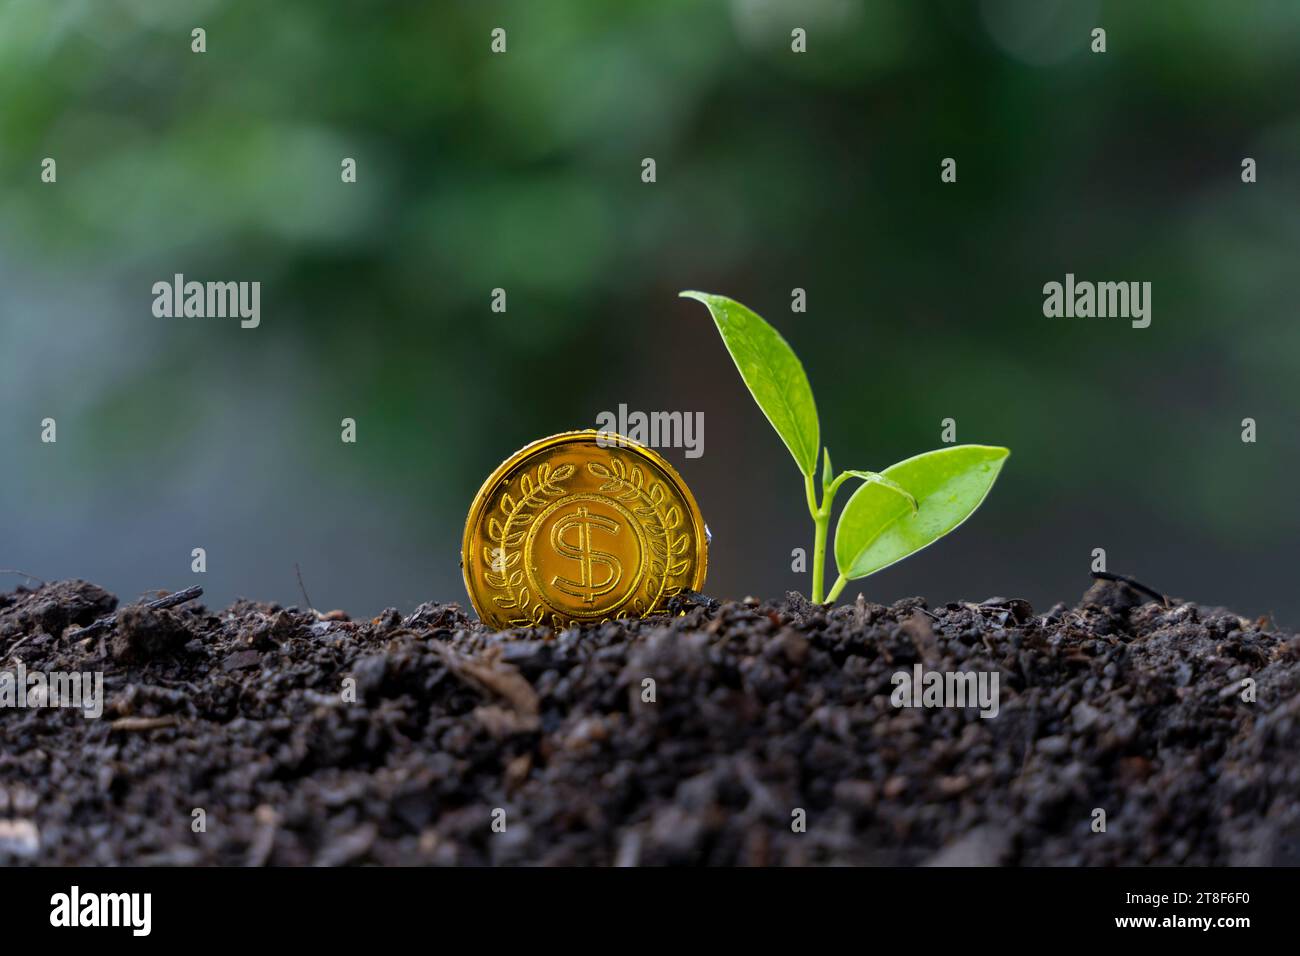 Seedling and golden coin on ground, Money growth rate concept. Stock Photo